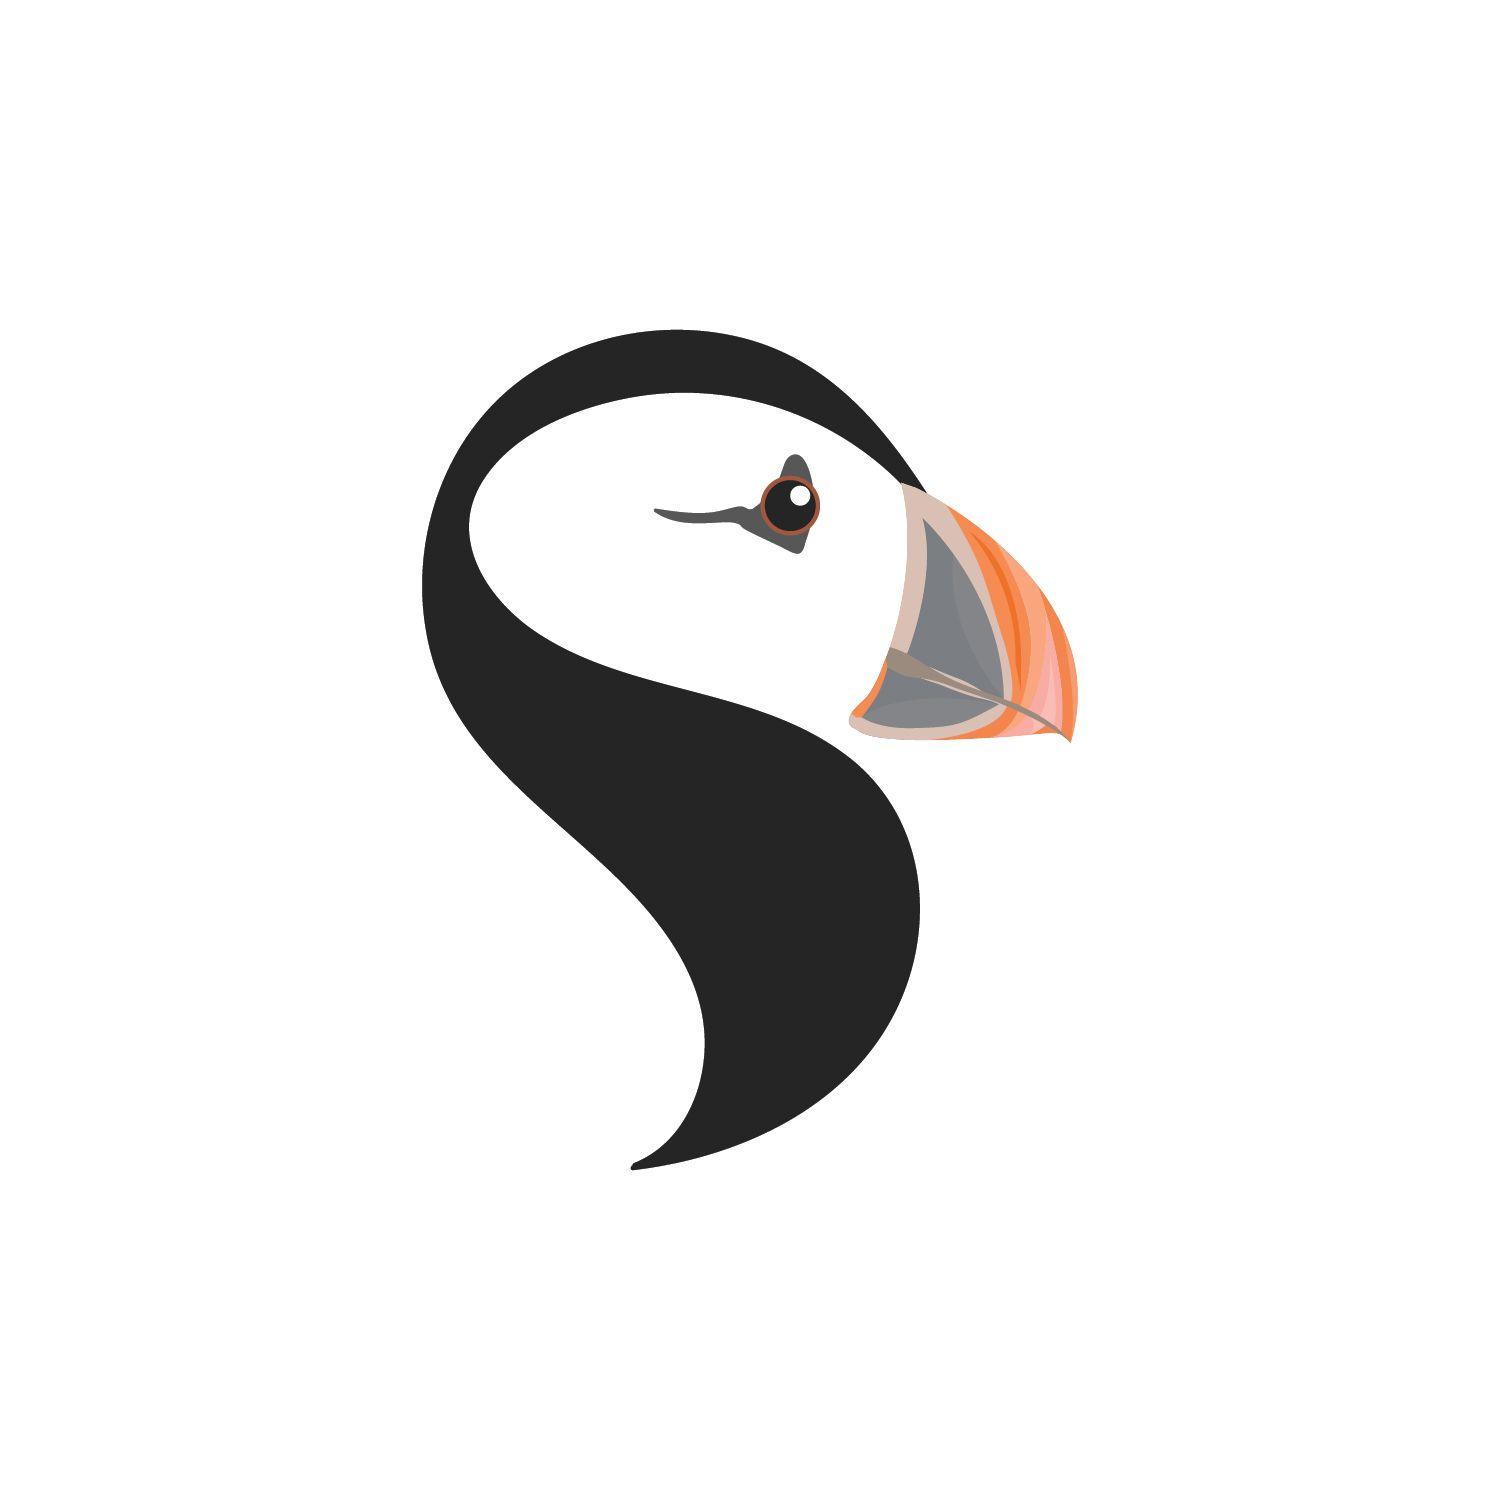 Puffin Logo - Modern, Elegant Logo Design for Logo is an image, not text. See